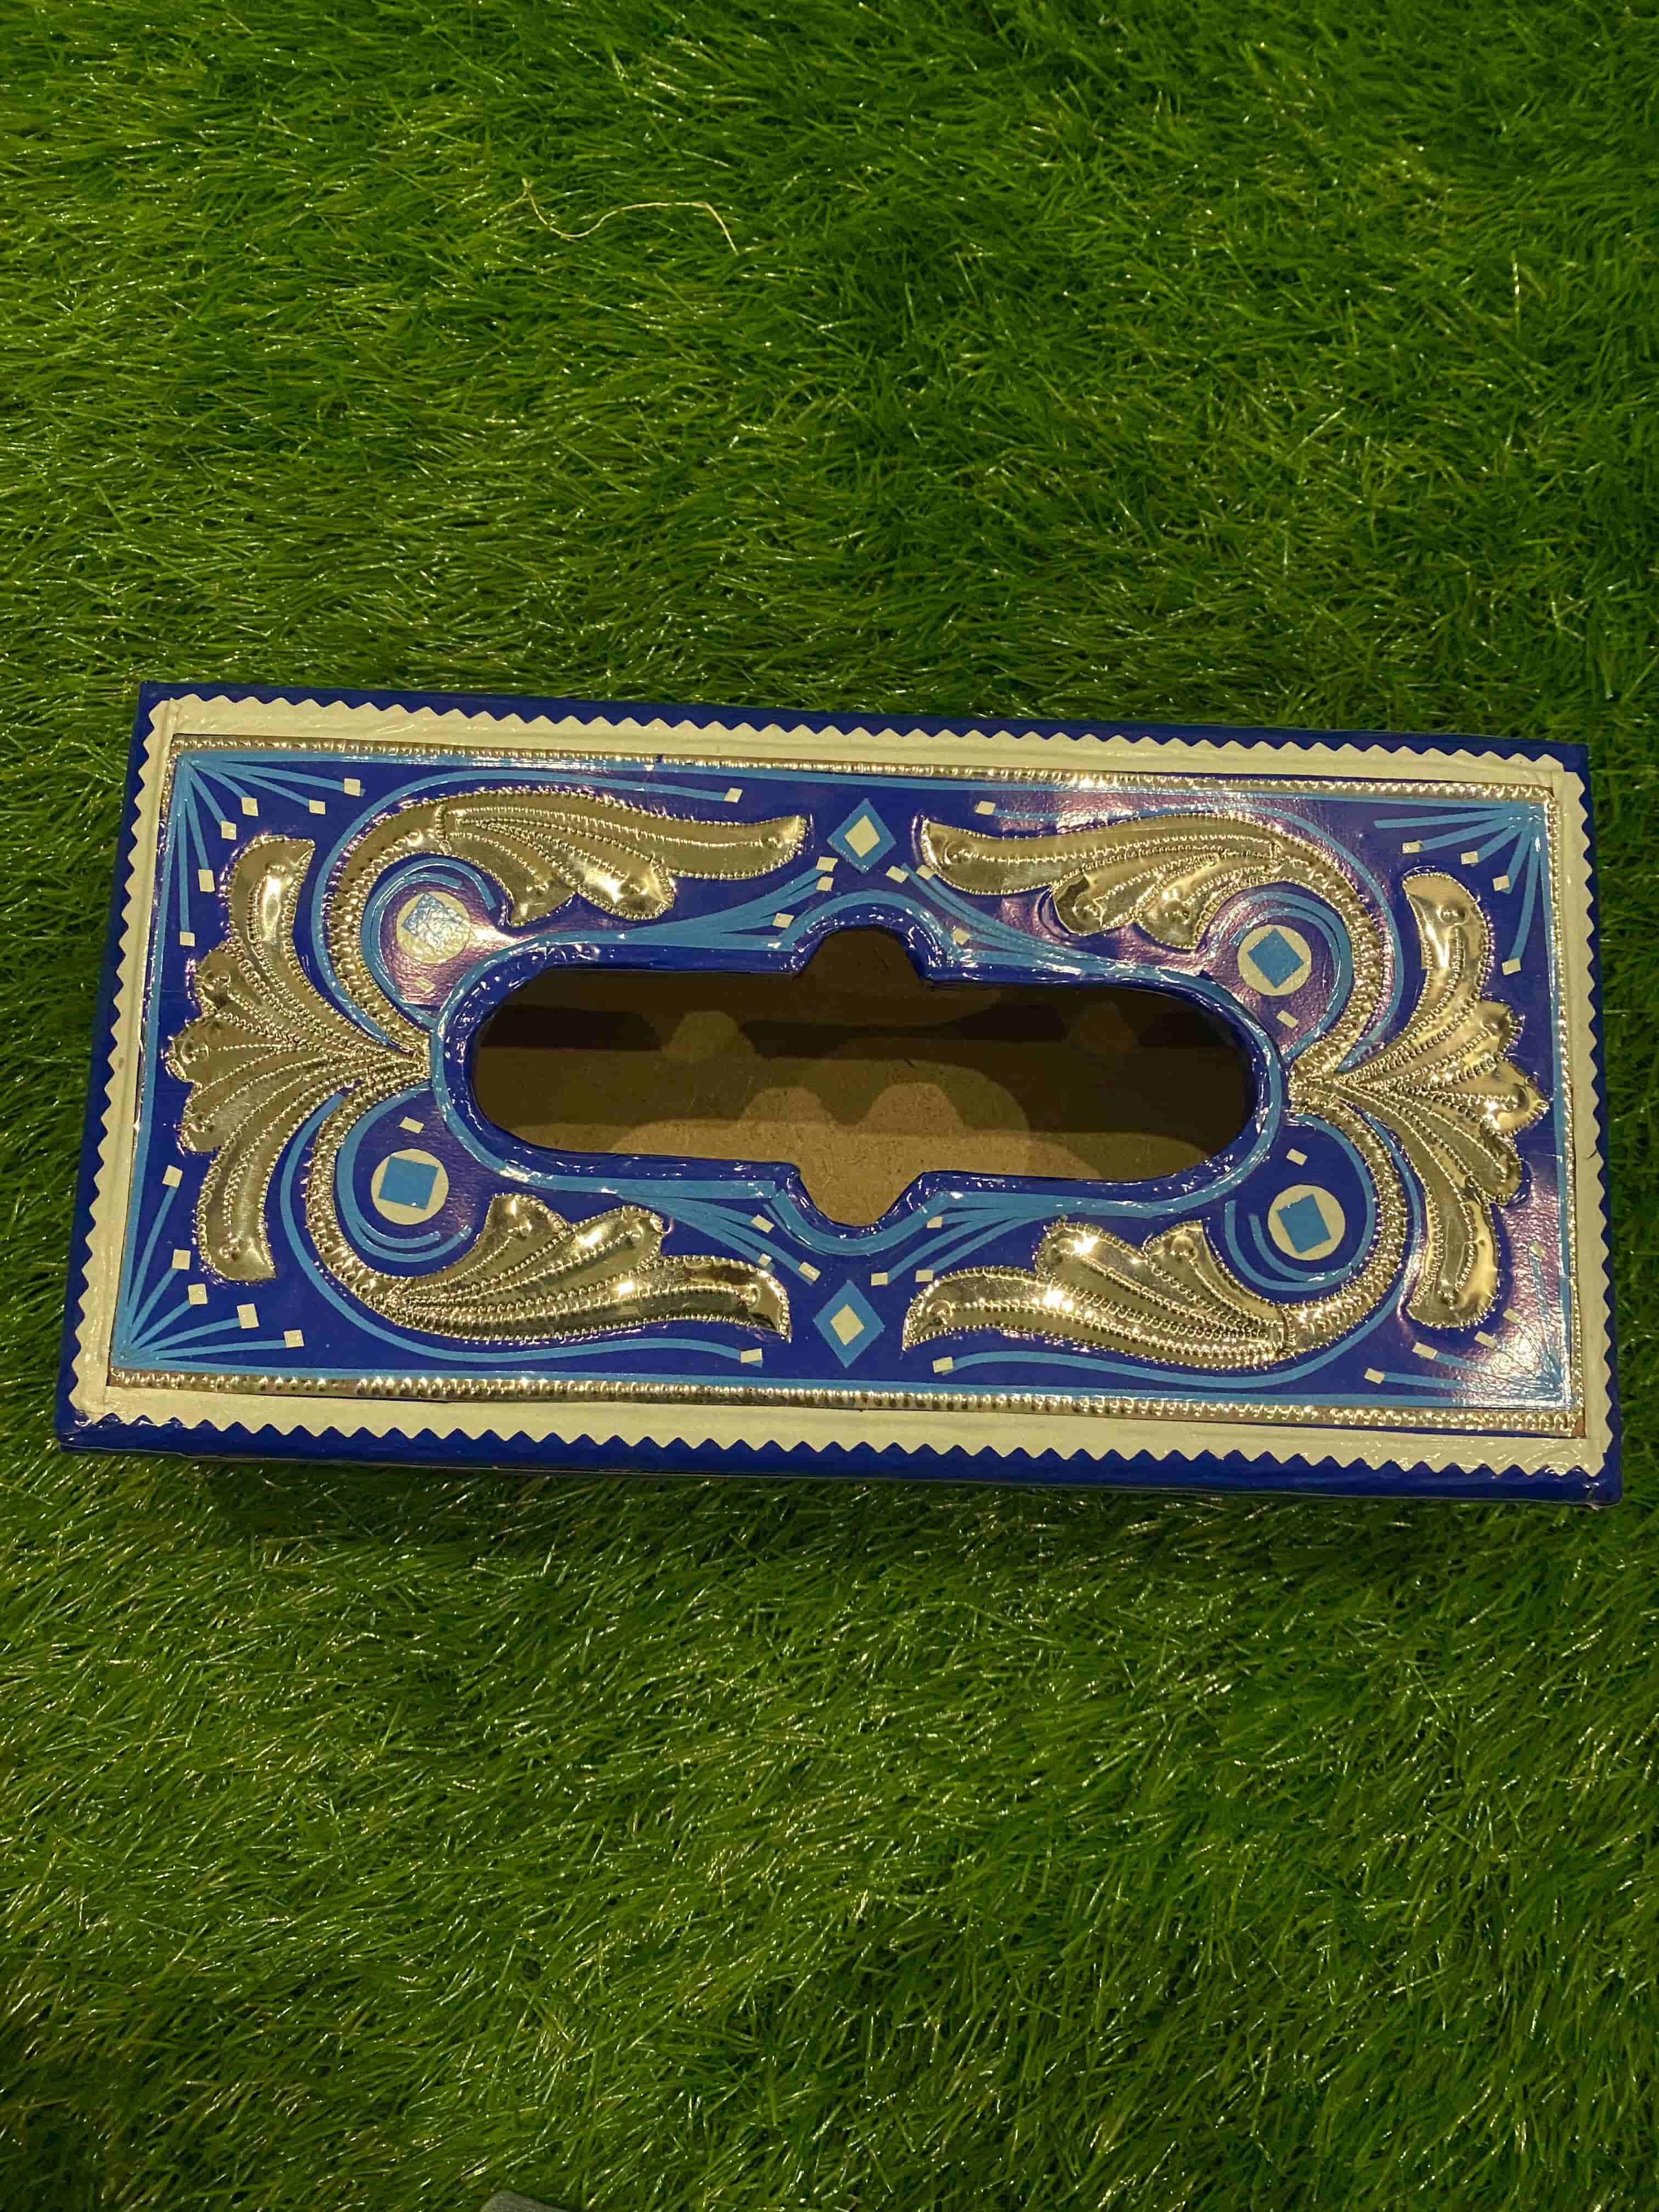 handcrafted-chamakpatti-tissue-box-in-royal-blue-naksh-decor-home-decor-tissue-boxes-truck-art-1